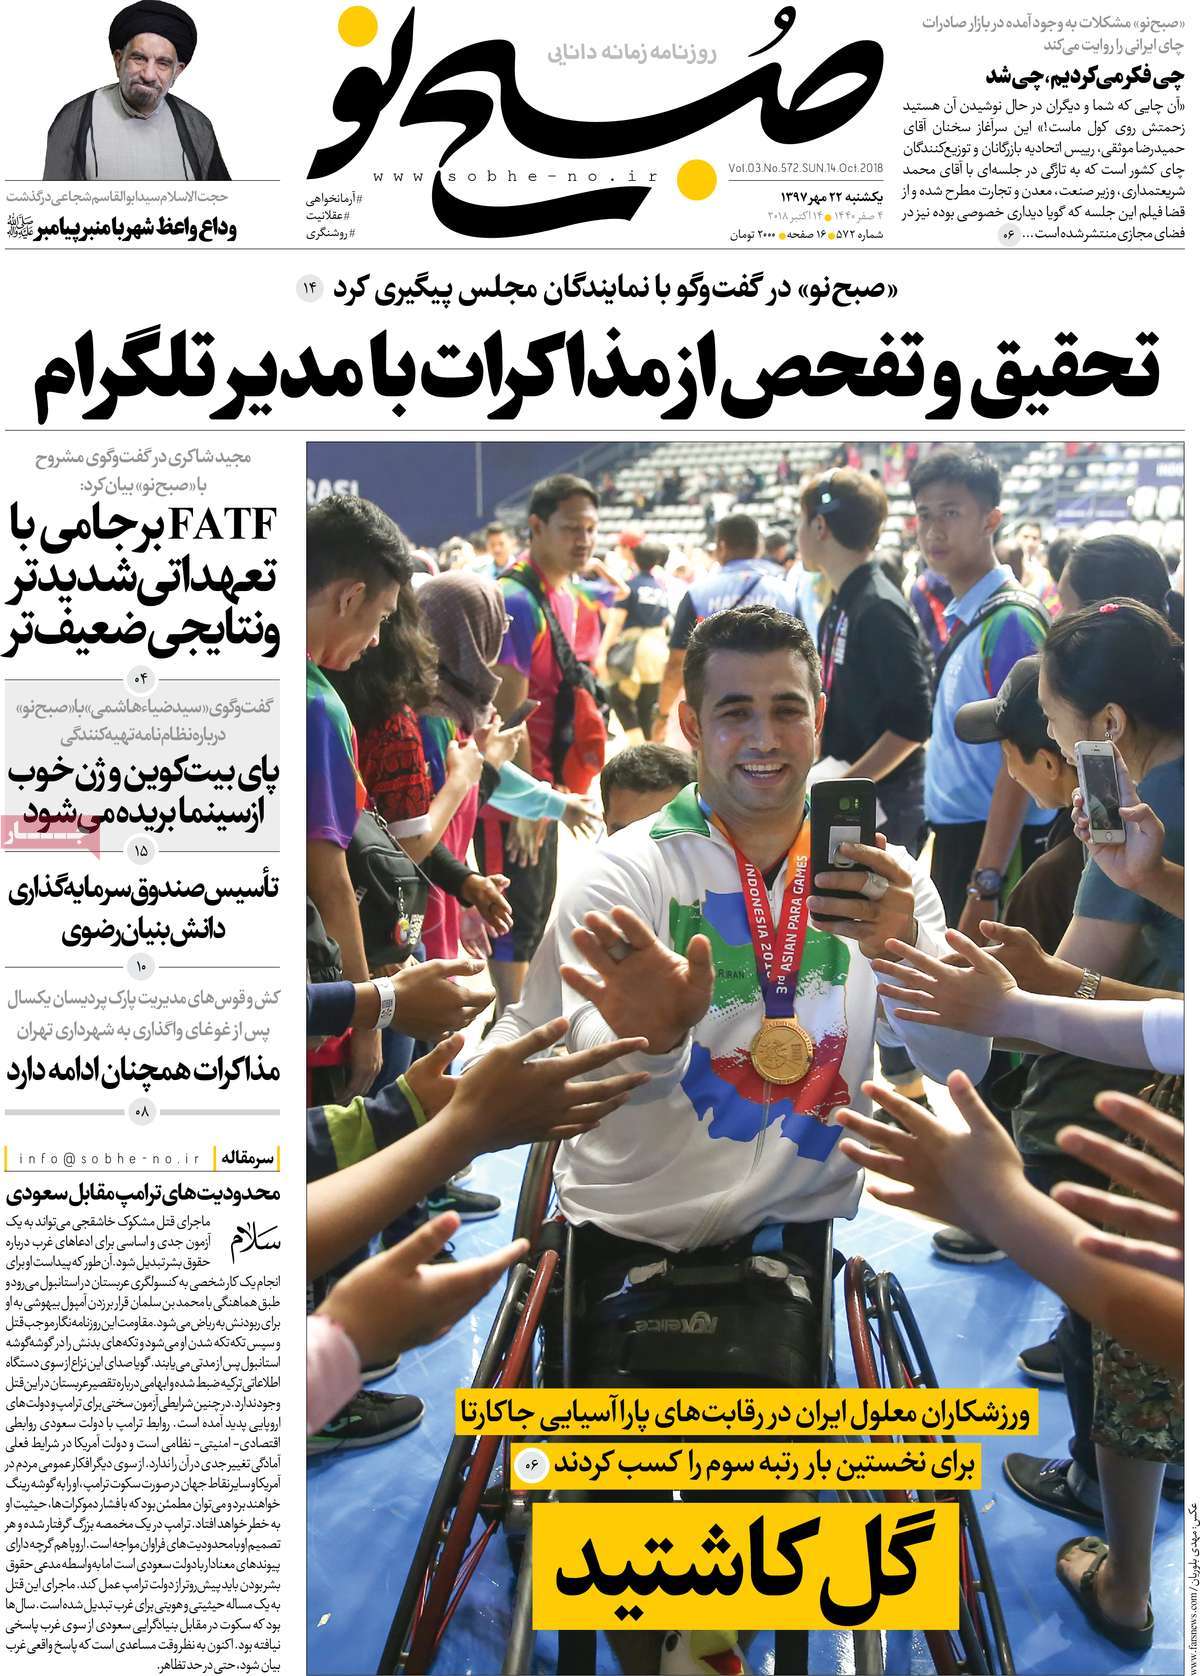 A Look at Iranian Newspaper Front Pages on October 14